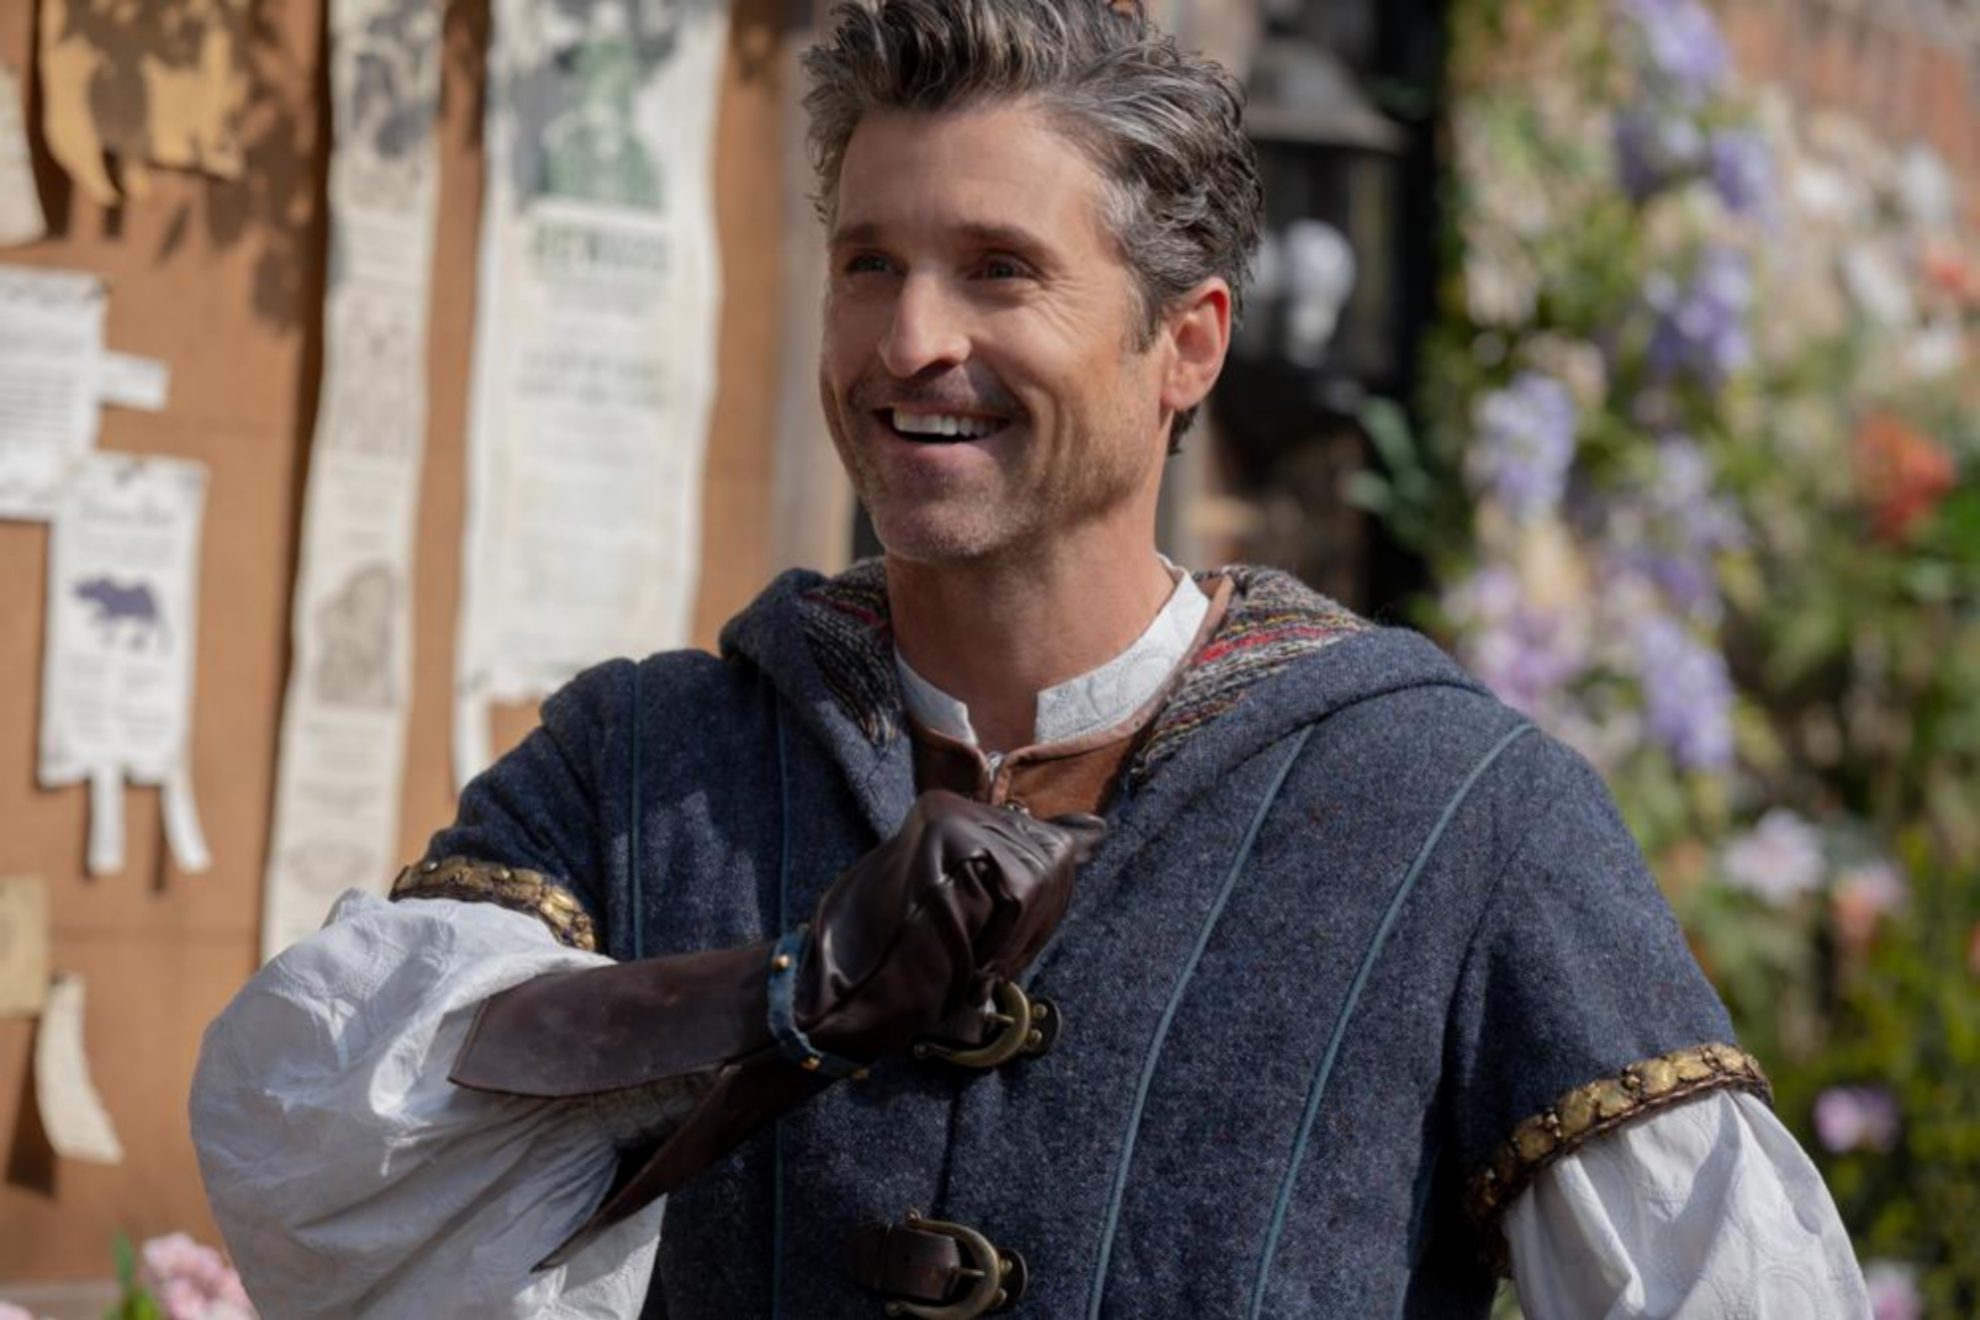 Patrick Dempsey in a scene from "Disenchanted".